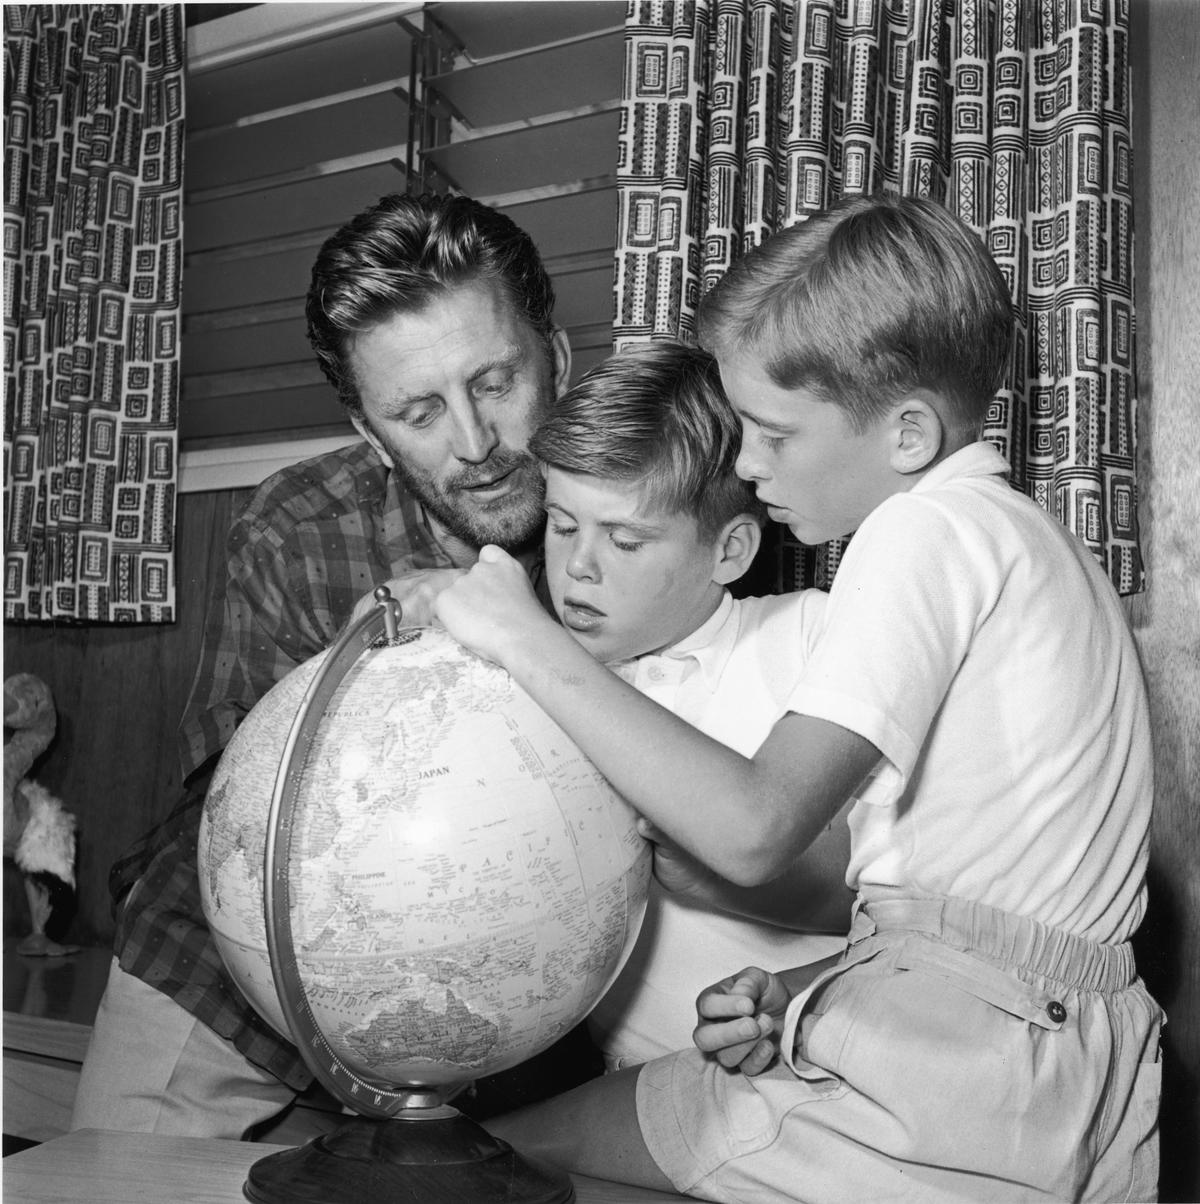 Douglas inspects a globe with two of his sons, Joel (L) and Michael (R), circa 1956 (©Getty Images | <a href="https://www.gettyimages.com/detail/news-photo/american-actor-kirk-douglas-looks-at-a-world-globe-with-two-news-photo/1858205">Arnold M. Johnson/Hulton Archive</a>)